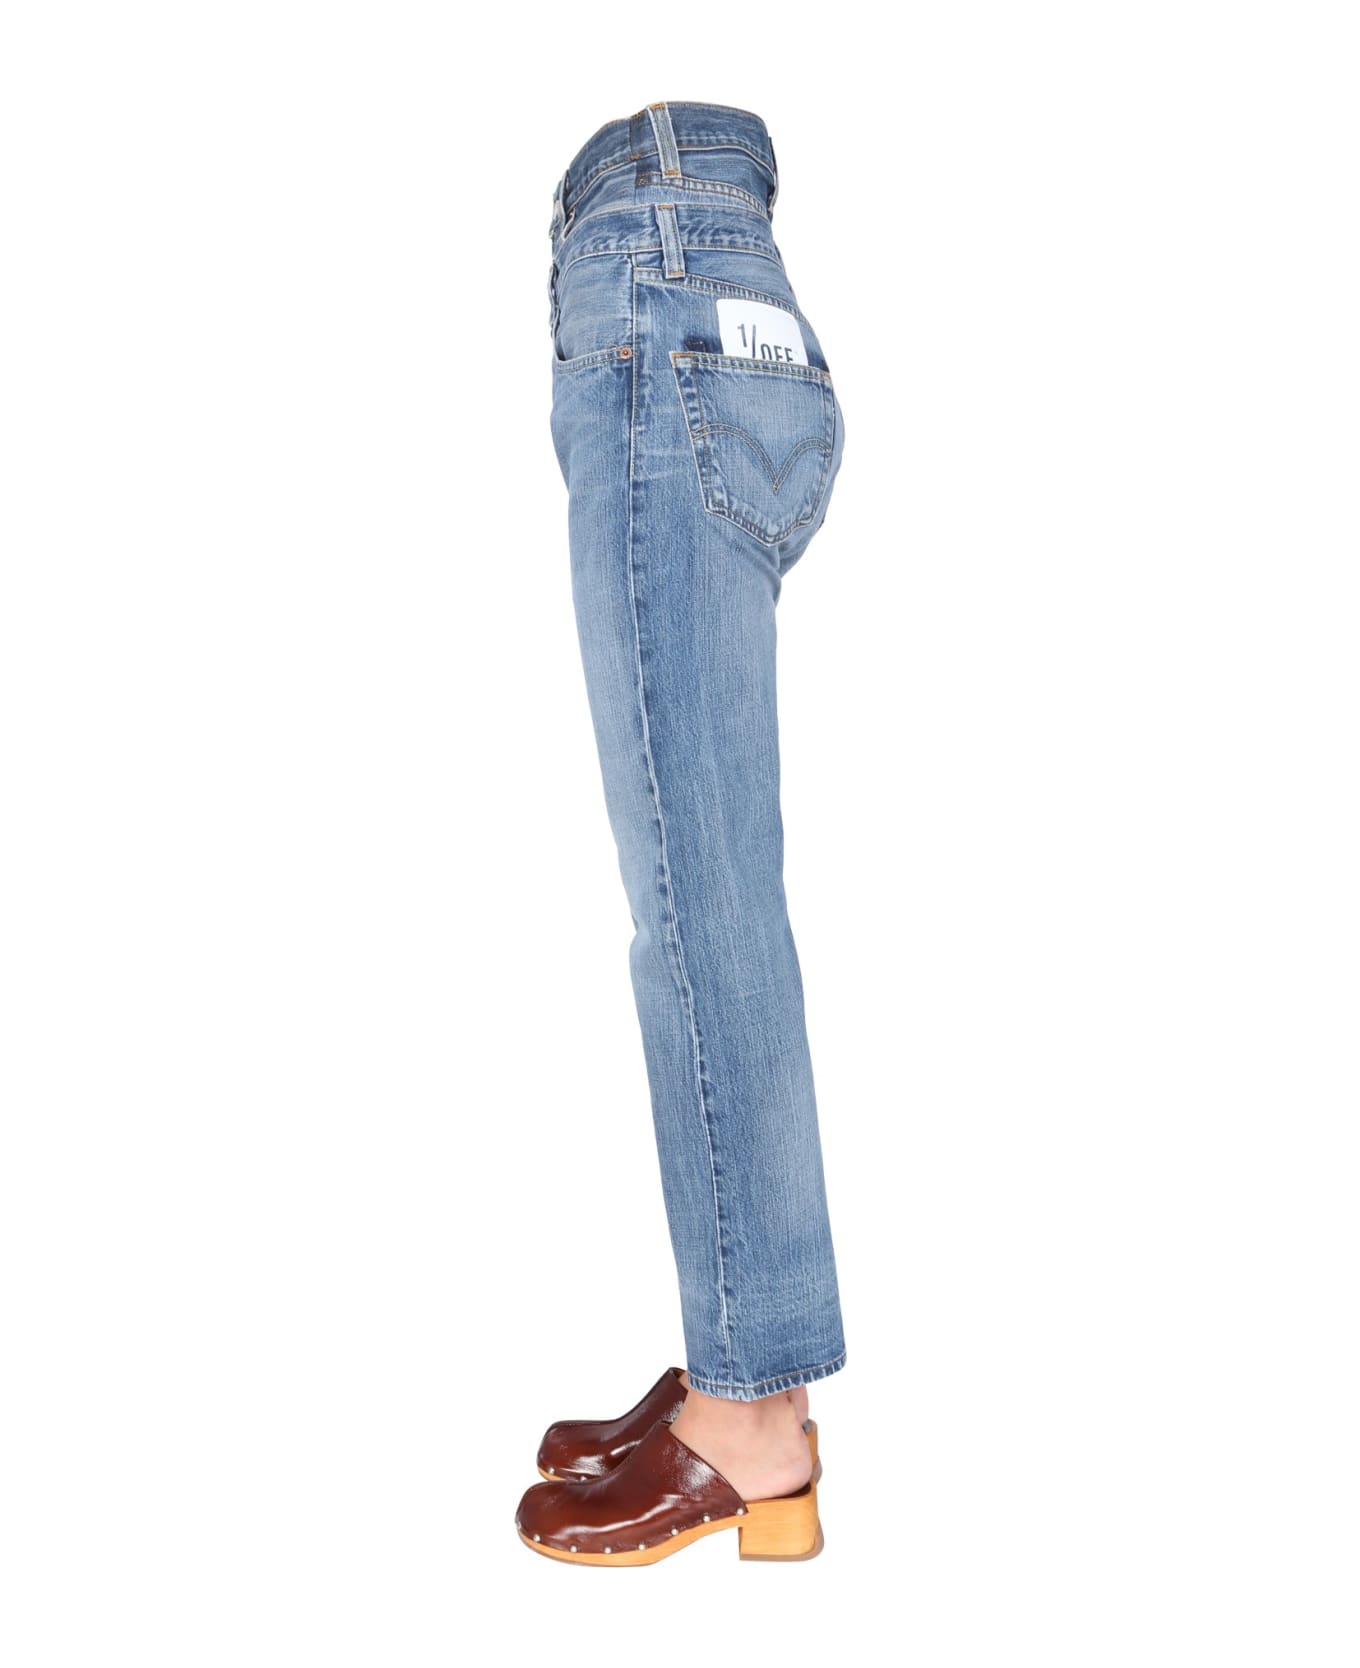 1/OFF Double Waisted Jeans - DENIM